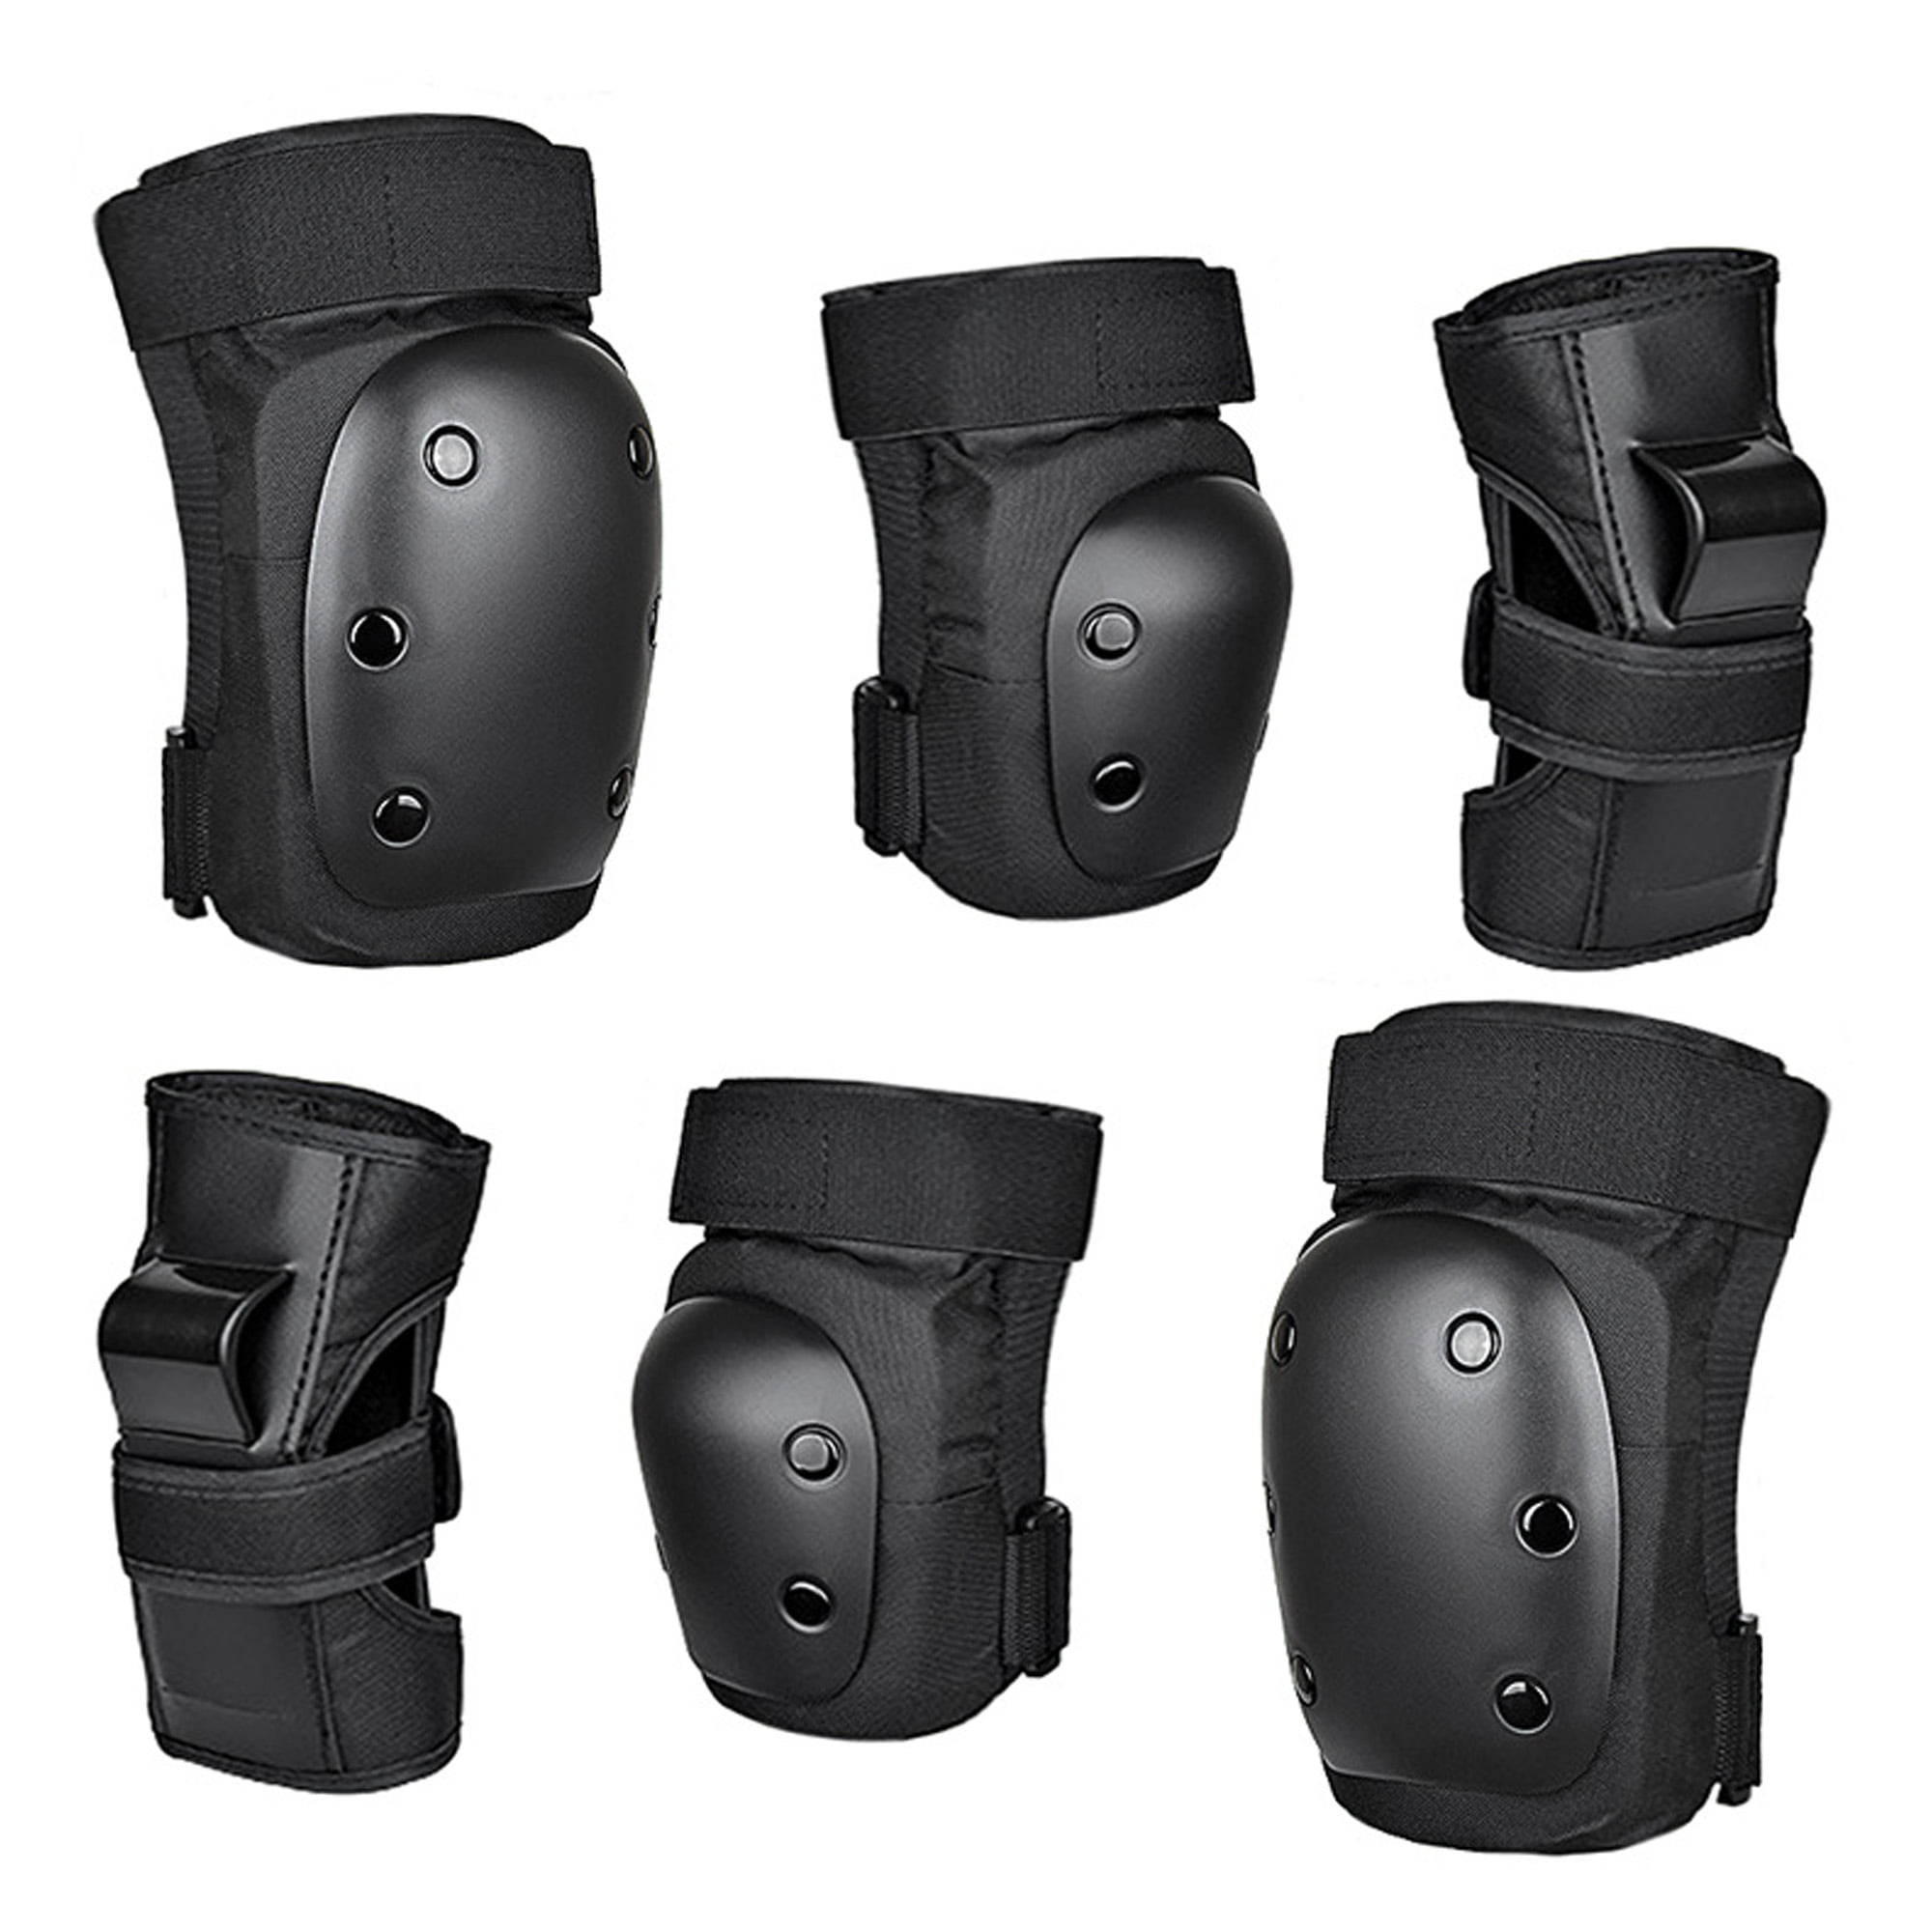 Protective Gear Set 6 in 1 Knee Elbow Pads with Wrist Guards Multi Sports S5S9 